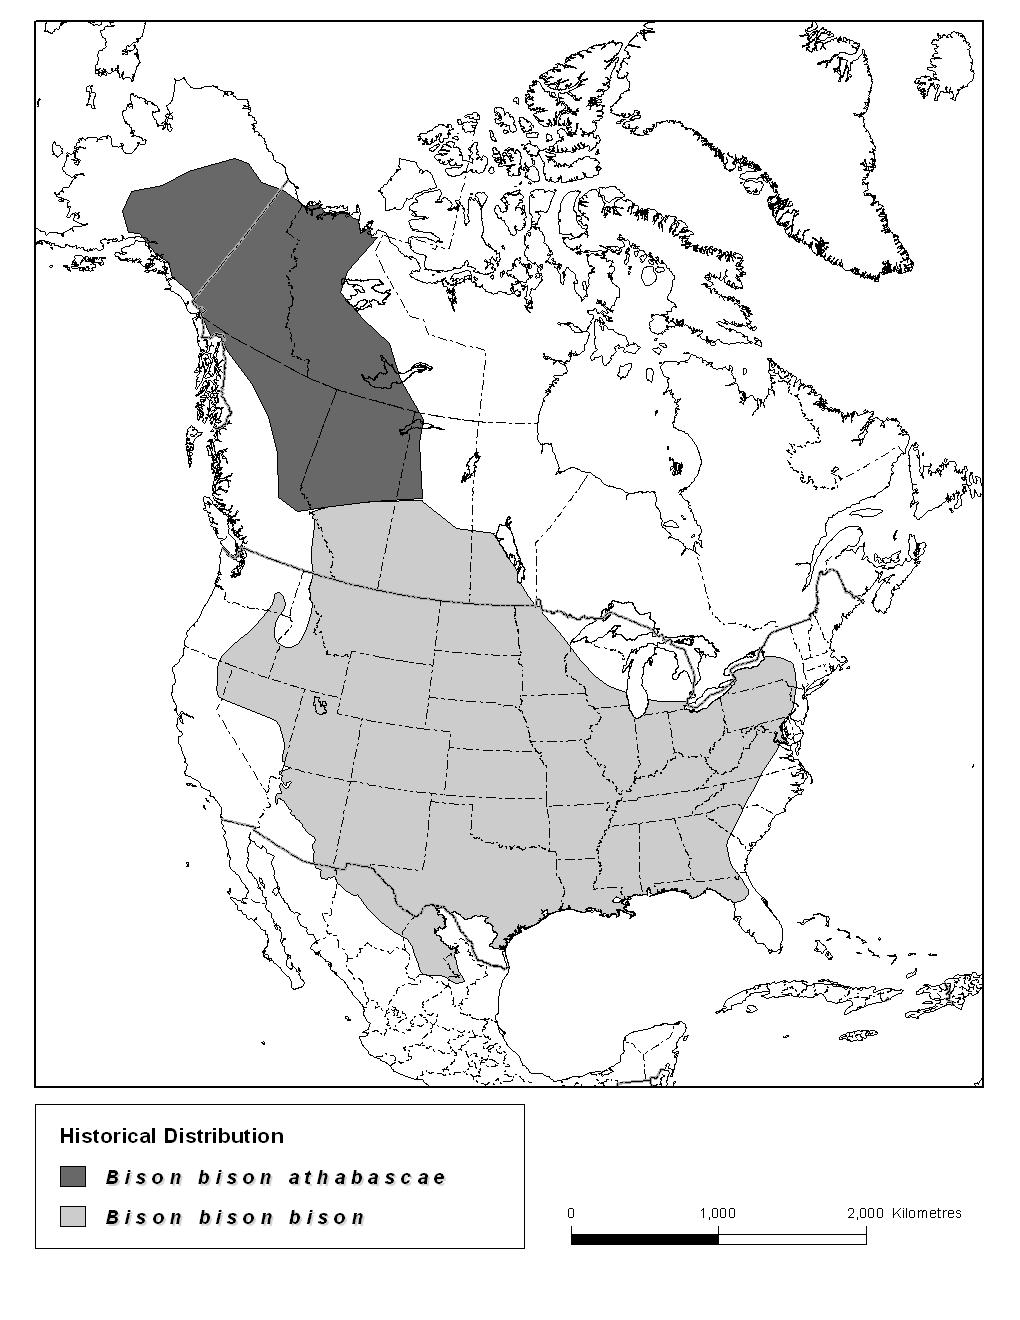 Figure 4. Historical (pre-settlement) distribution of Wood Bison and Plains Bison in North America.